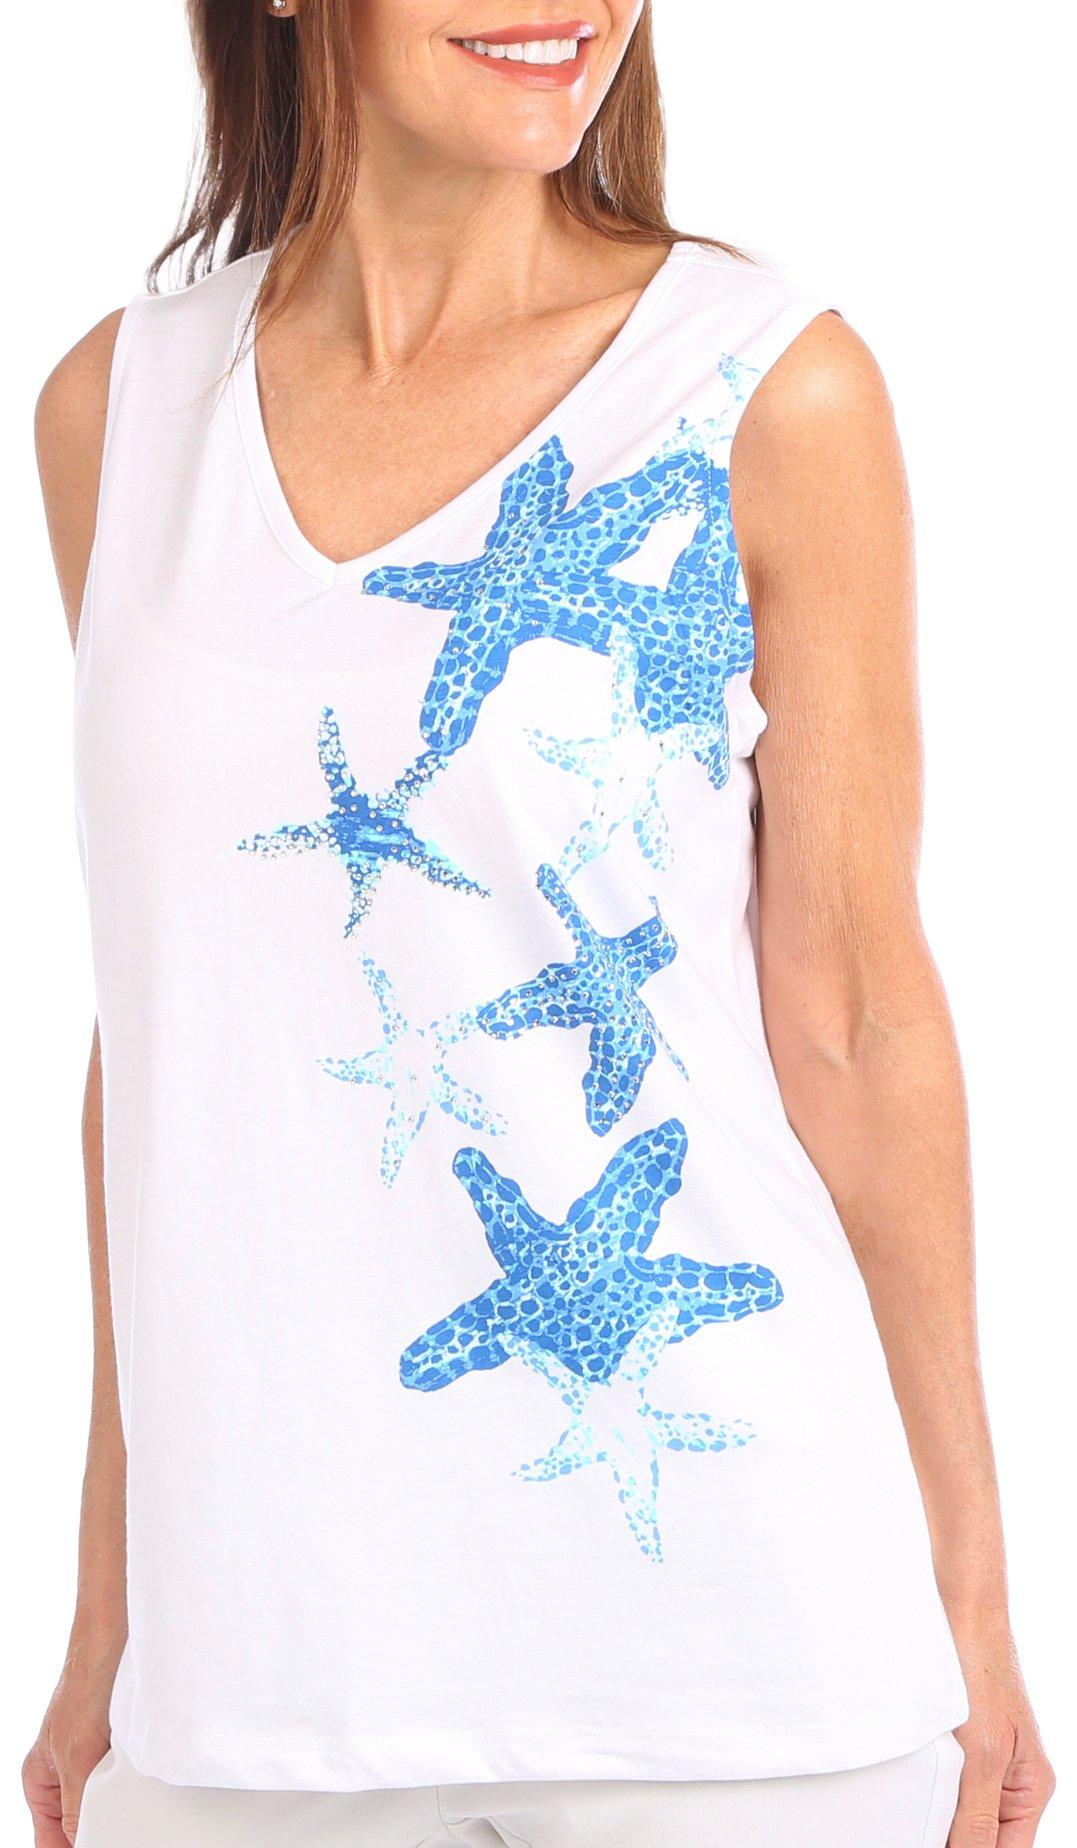 Coral Bay Petite Embellished Star Fish  Sleeveless Top